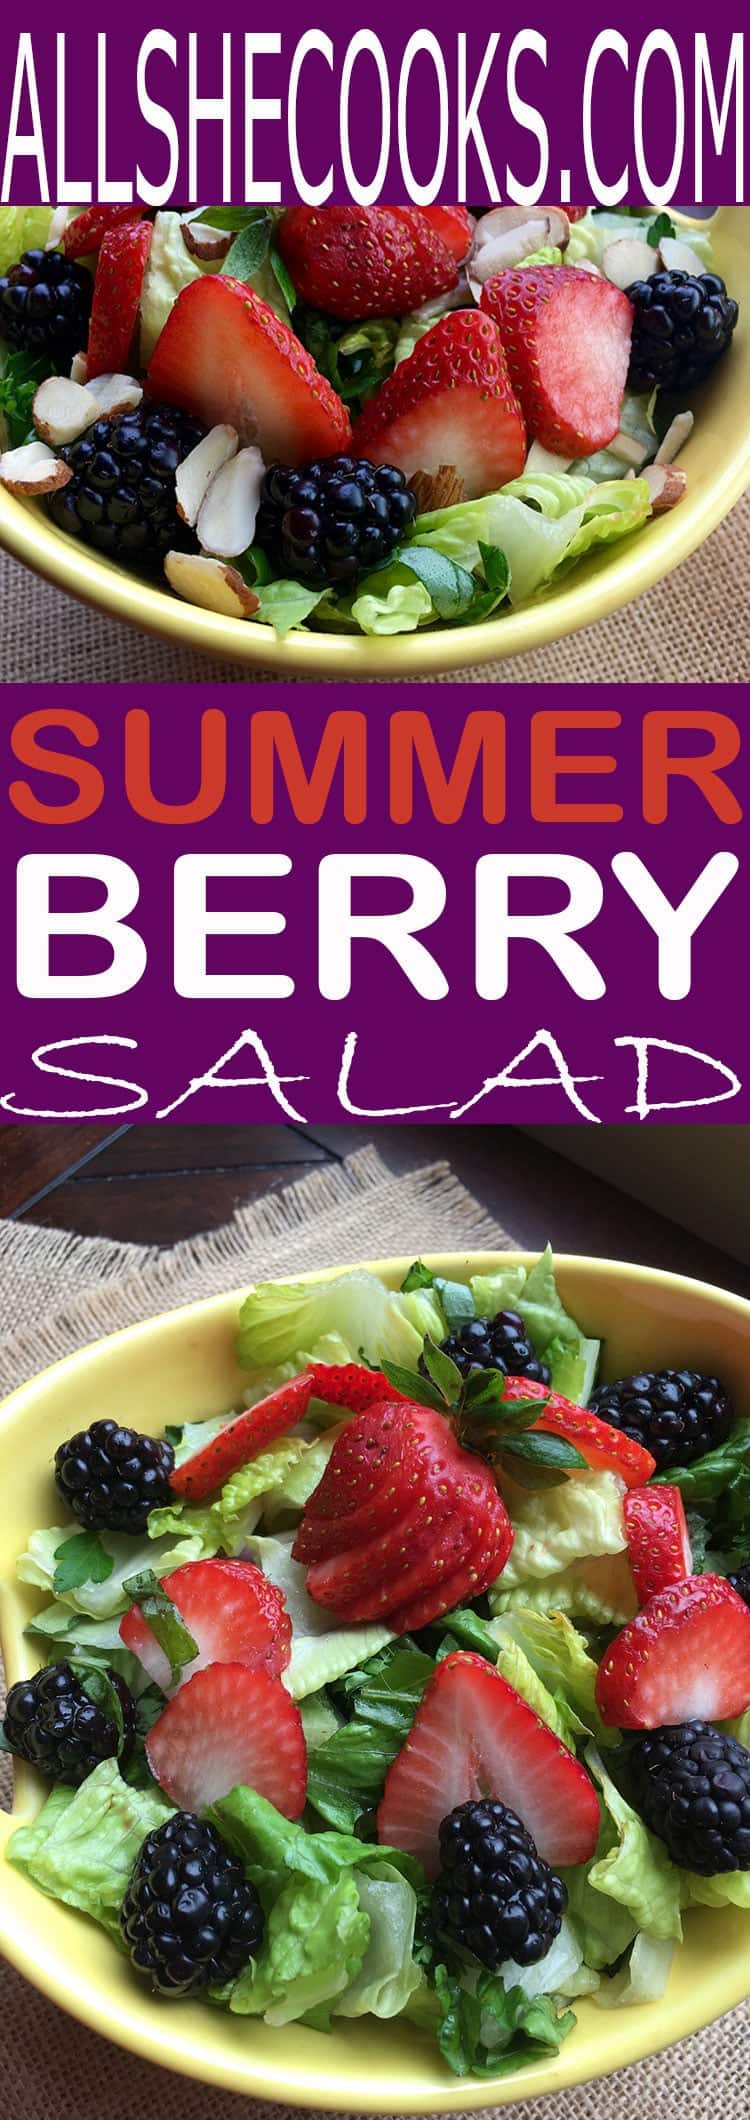 Enjoy this summer berry salad with raspberry vinaigrette. Delicious and easy recipe for a lighter summer meal.